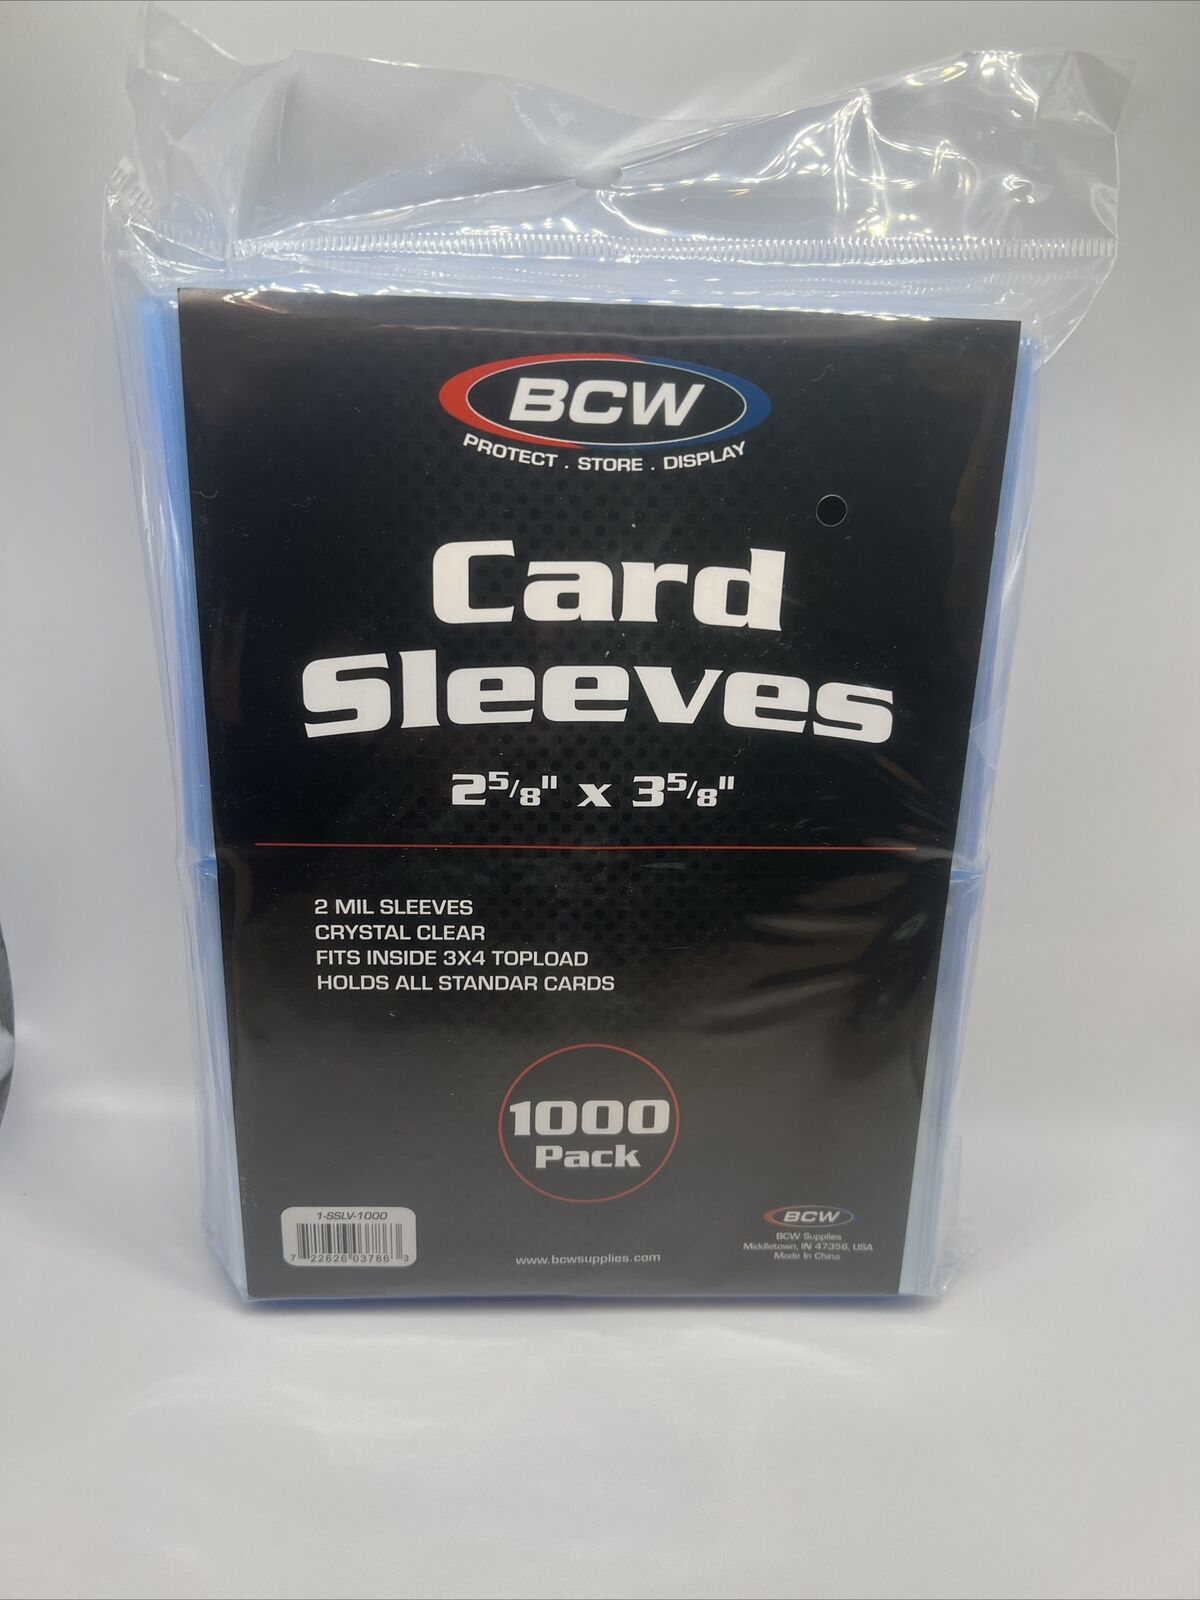 BCW Penny Card Soft Sleeves 1 Pack of 1000 Sleeves for Standard Sized Cards